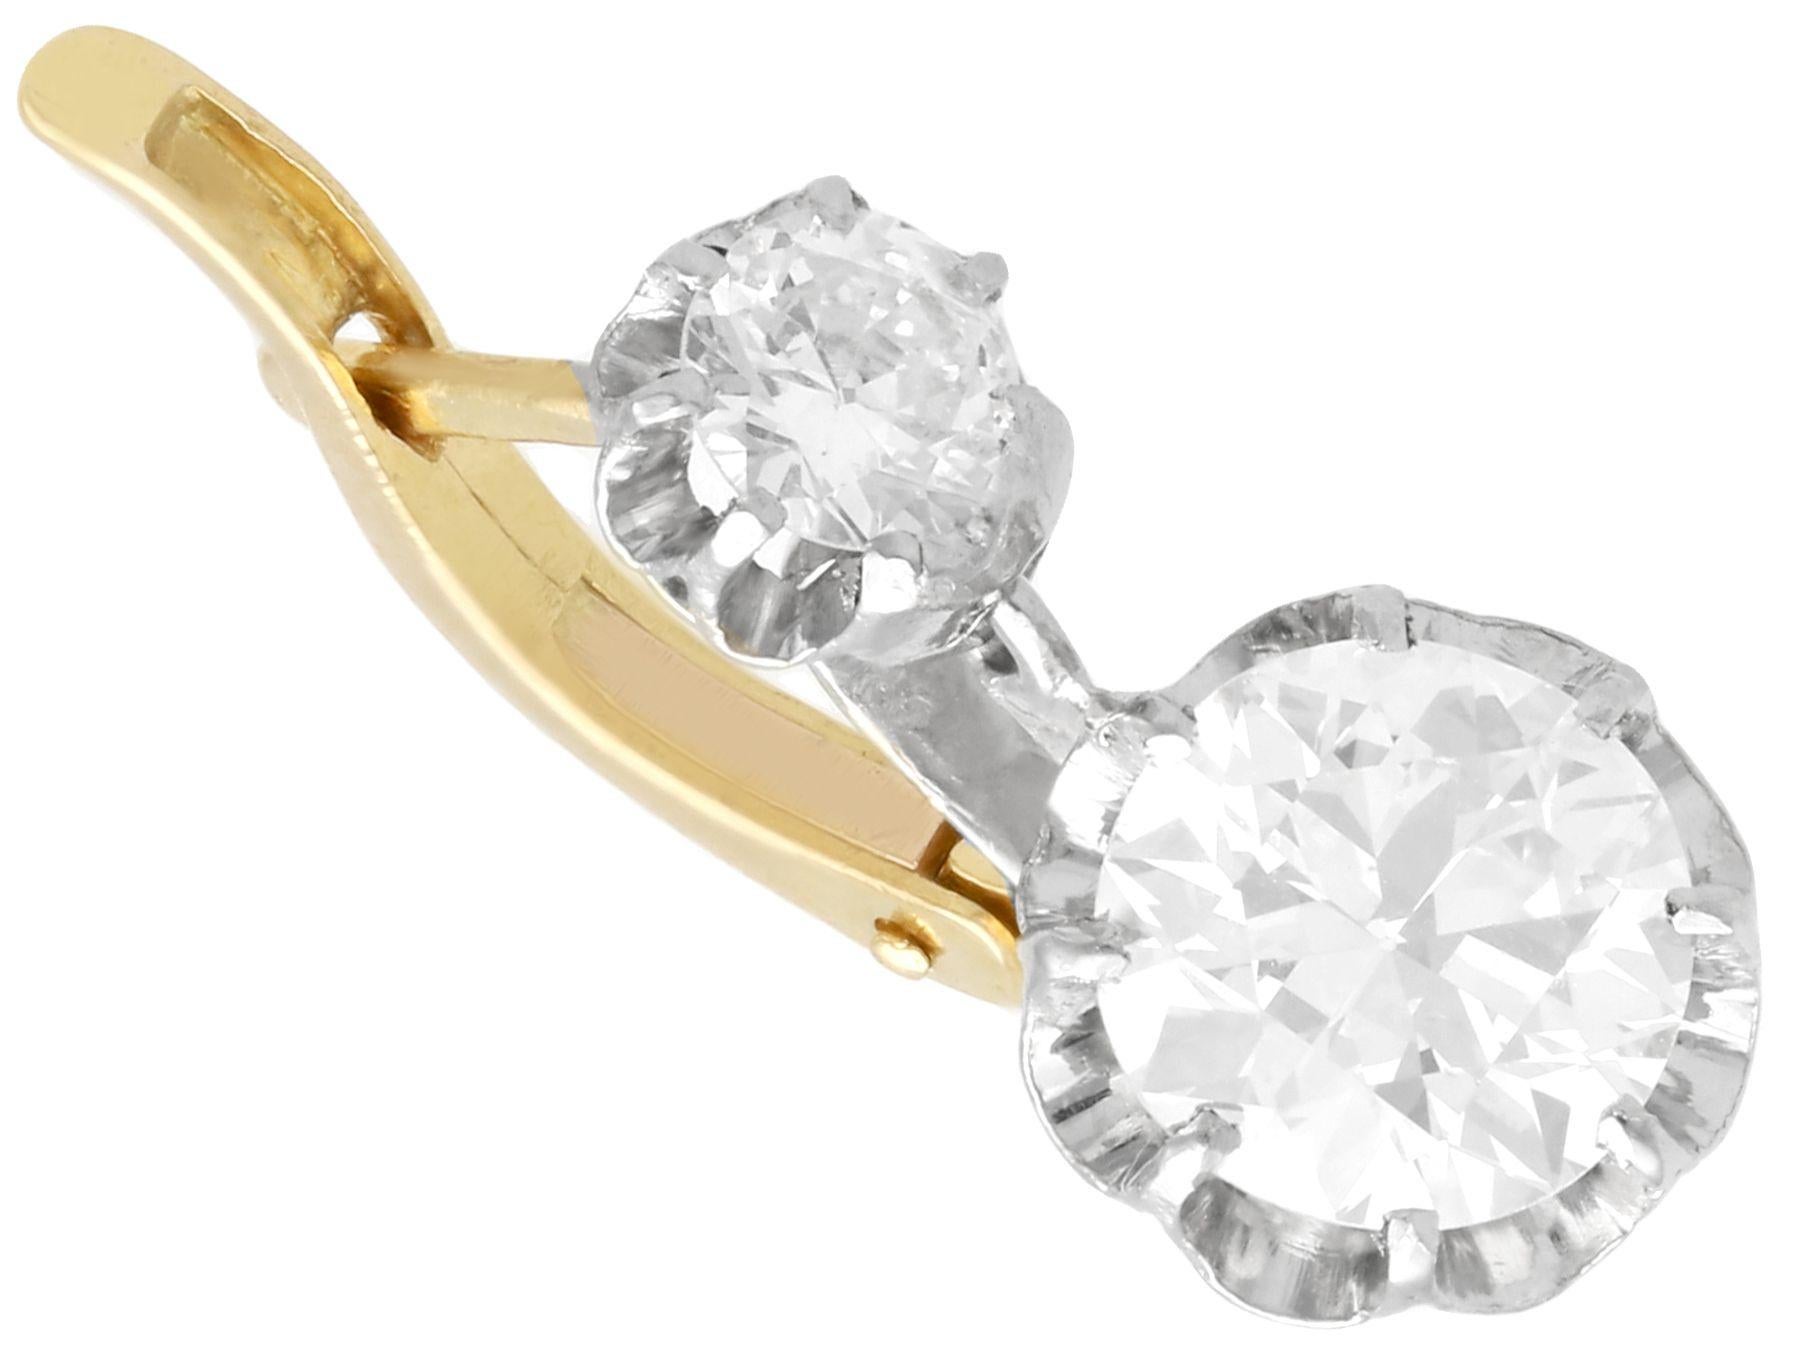 A stunning, fine and impressive pair of antique 2.64 carat diamond and 18 karat yellow gold, platinum set drop earrings; part of our diverse antique estate jewelry collections.

These stunning antique drop earrings have been crafted in 18k yellow